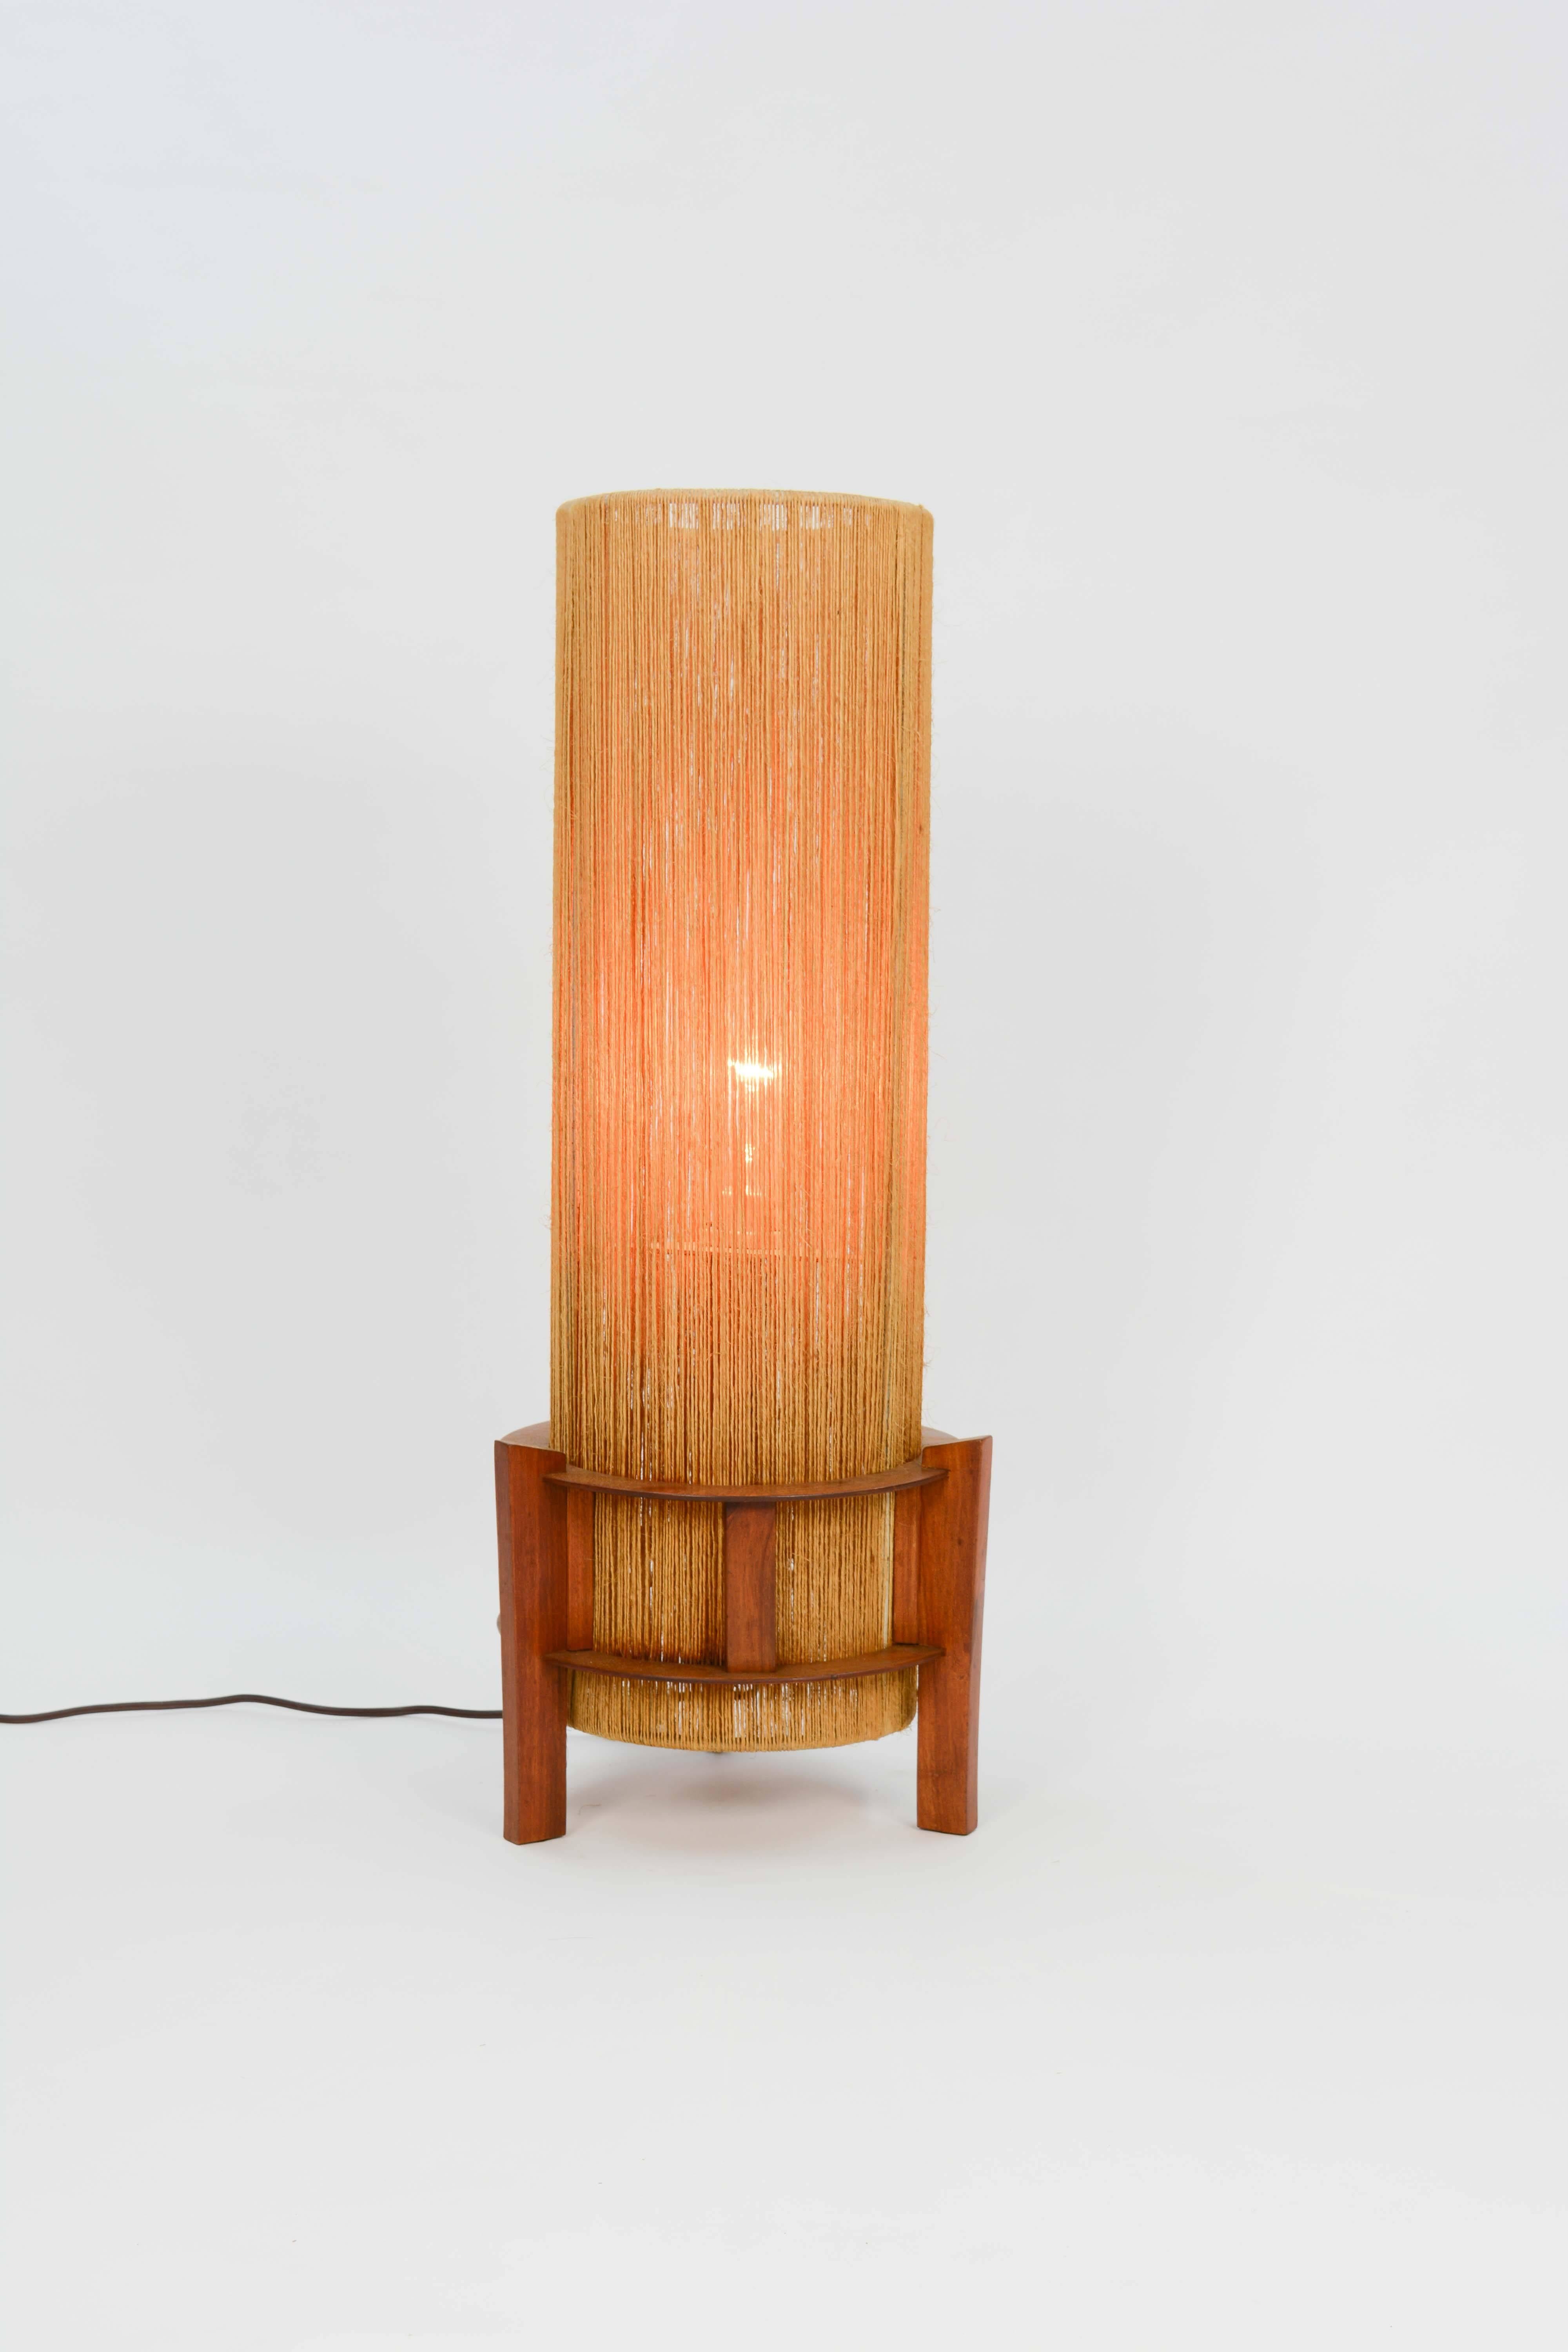 A wonderful floor or tall table lamp by Ib Fabiansen for Fog & Morup. A rare light and hard to find in this great condition.